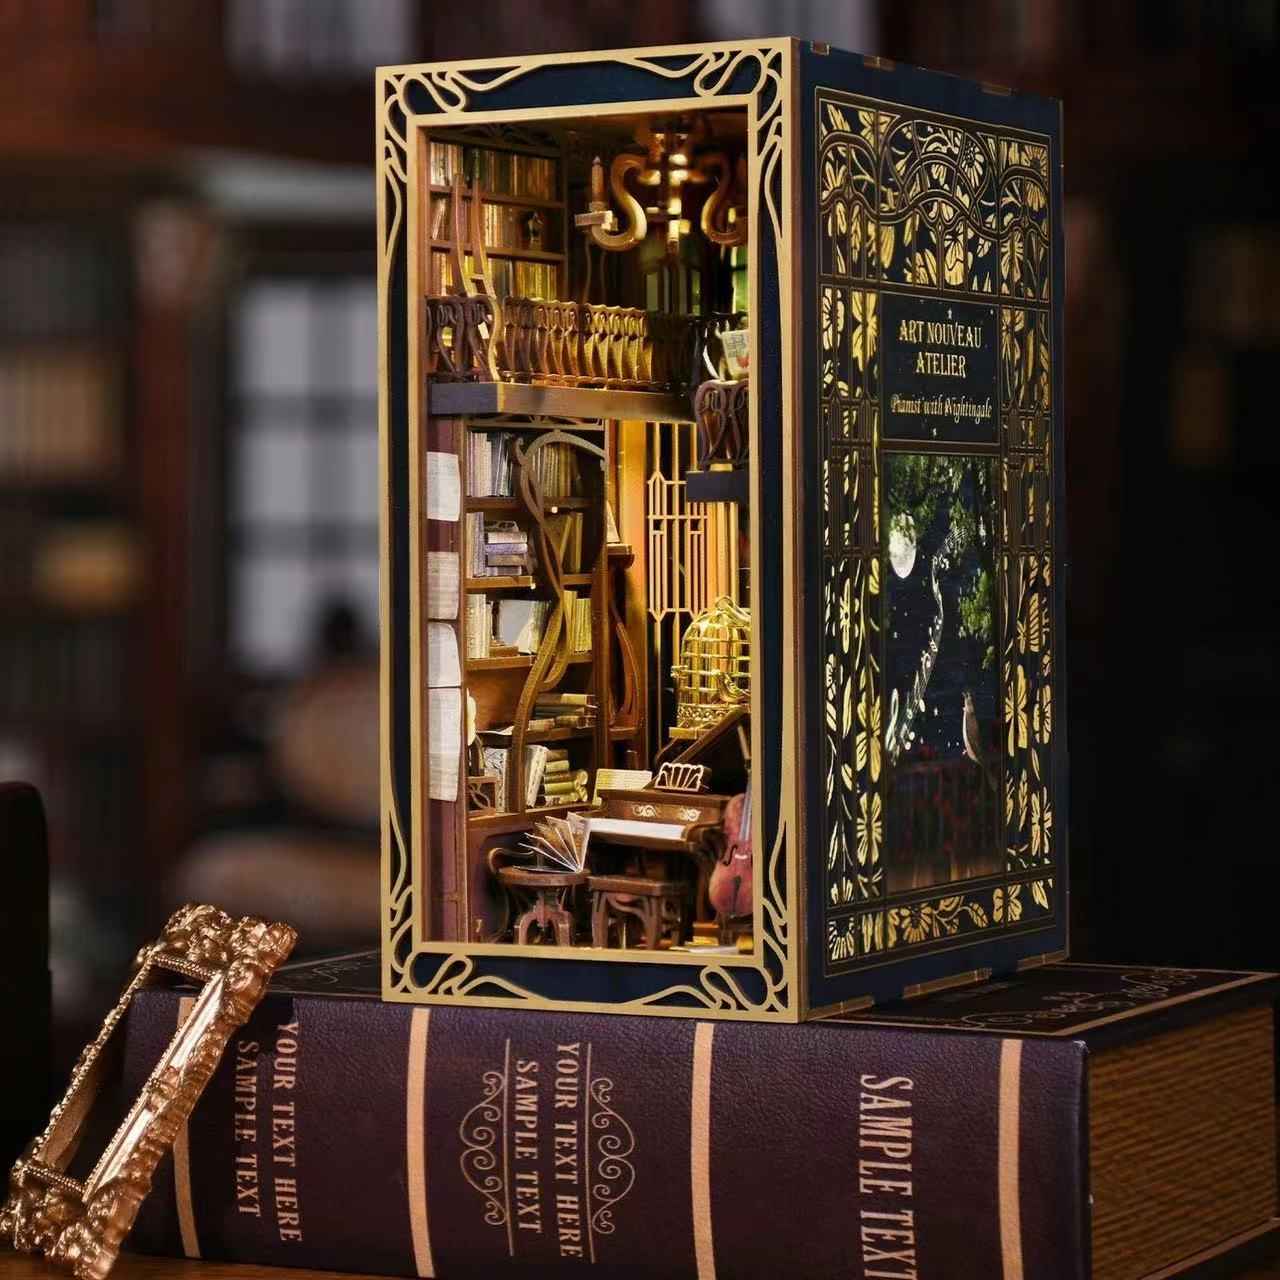 Pianist With Nightingale DIY Book Nook kit inspired by the captivating era of the Art Nouveau movement. perfect for DIY crafting enthusiasts and dollhouse collectors alike. Ideal for bookshelf decor of gift for music or history overs.